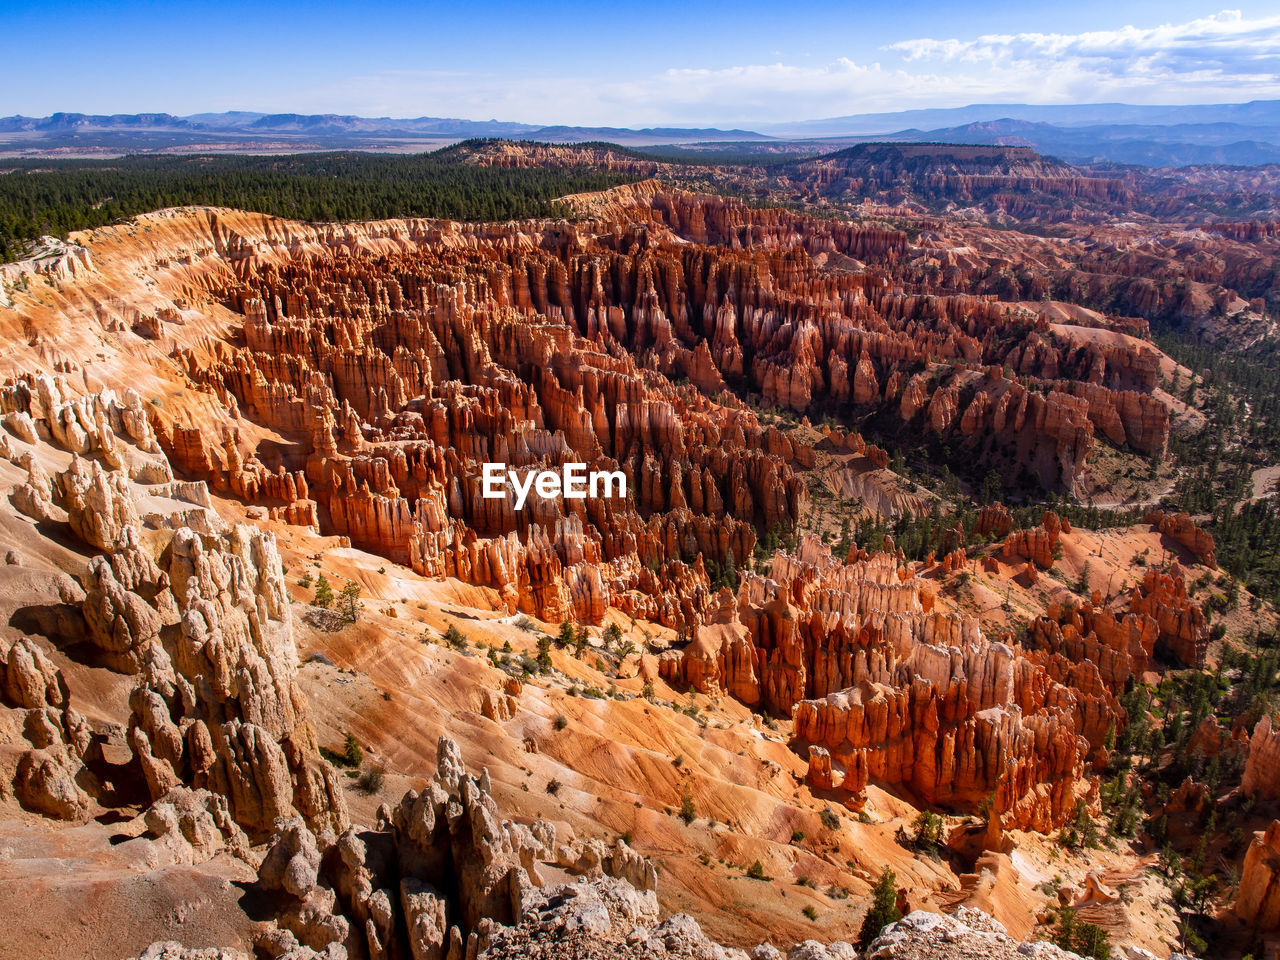 View of hoodoos in the amphieheater in bryce canyon national park, utah, usa